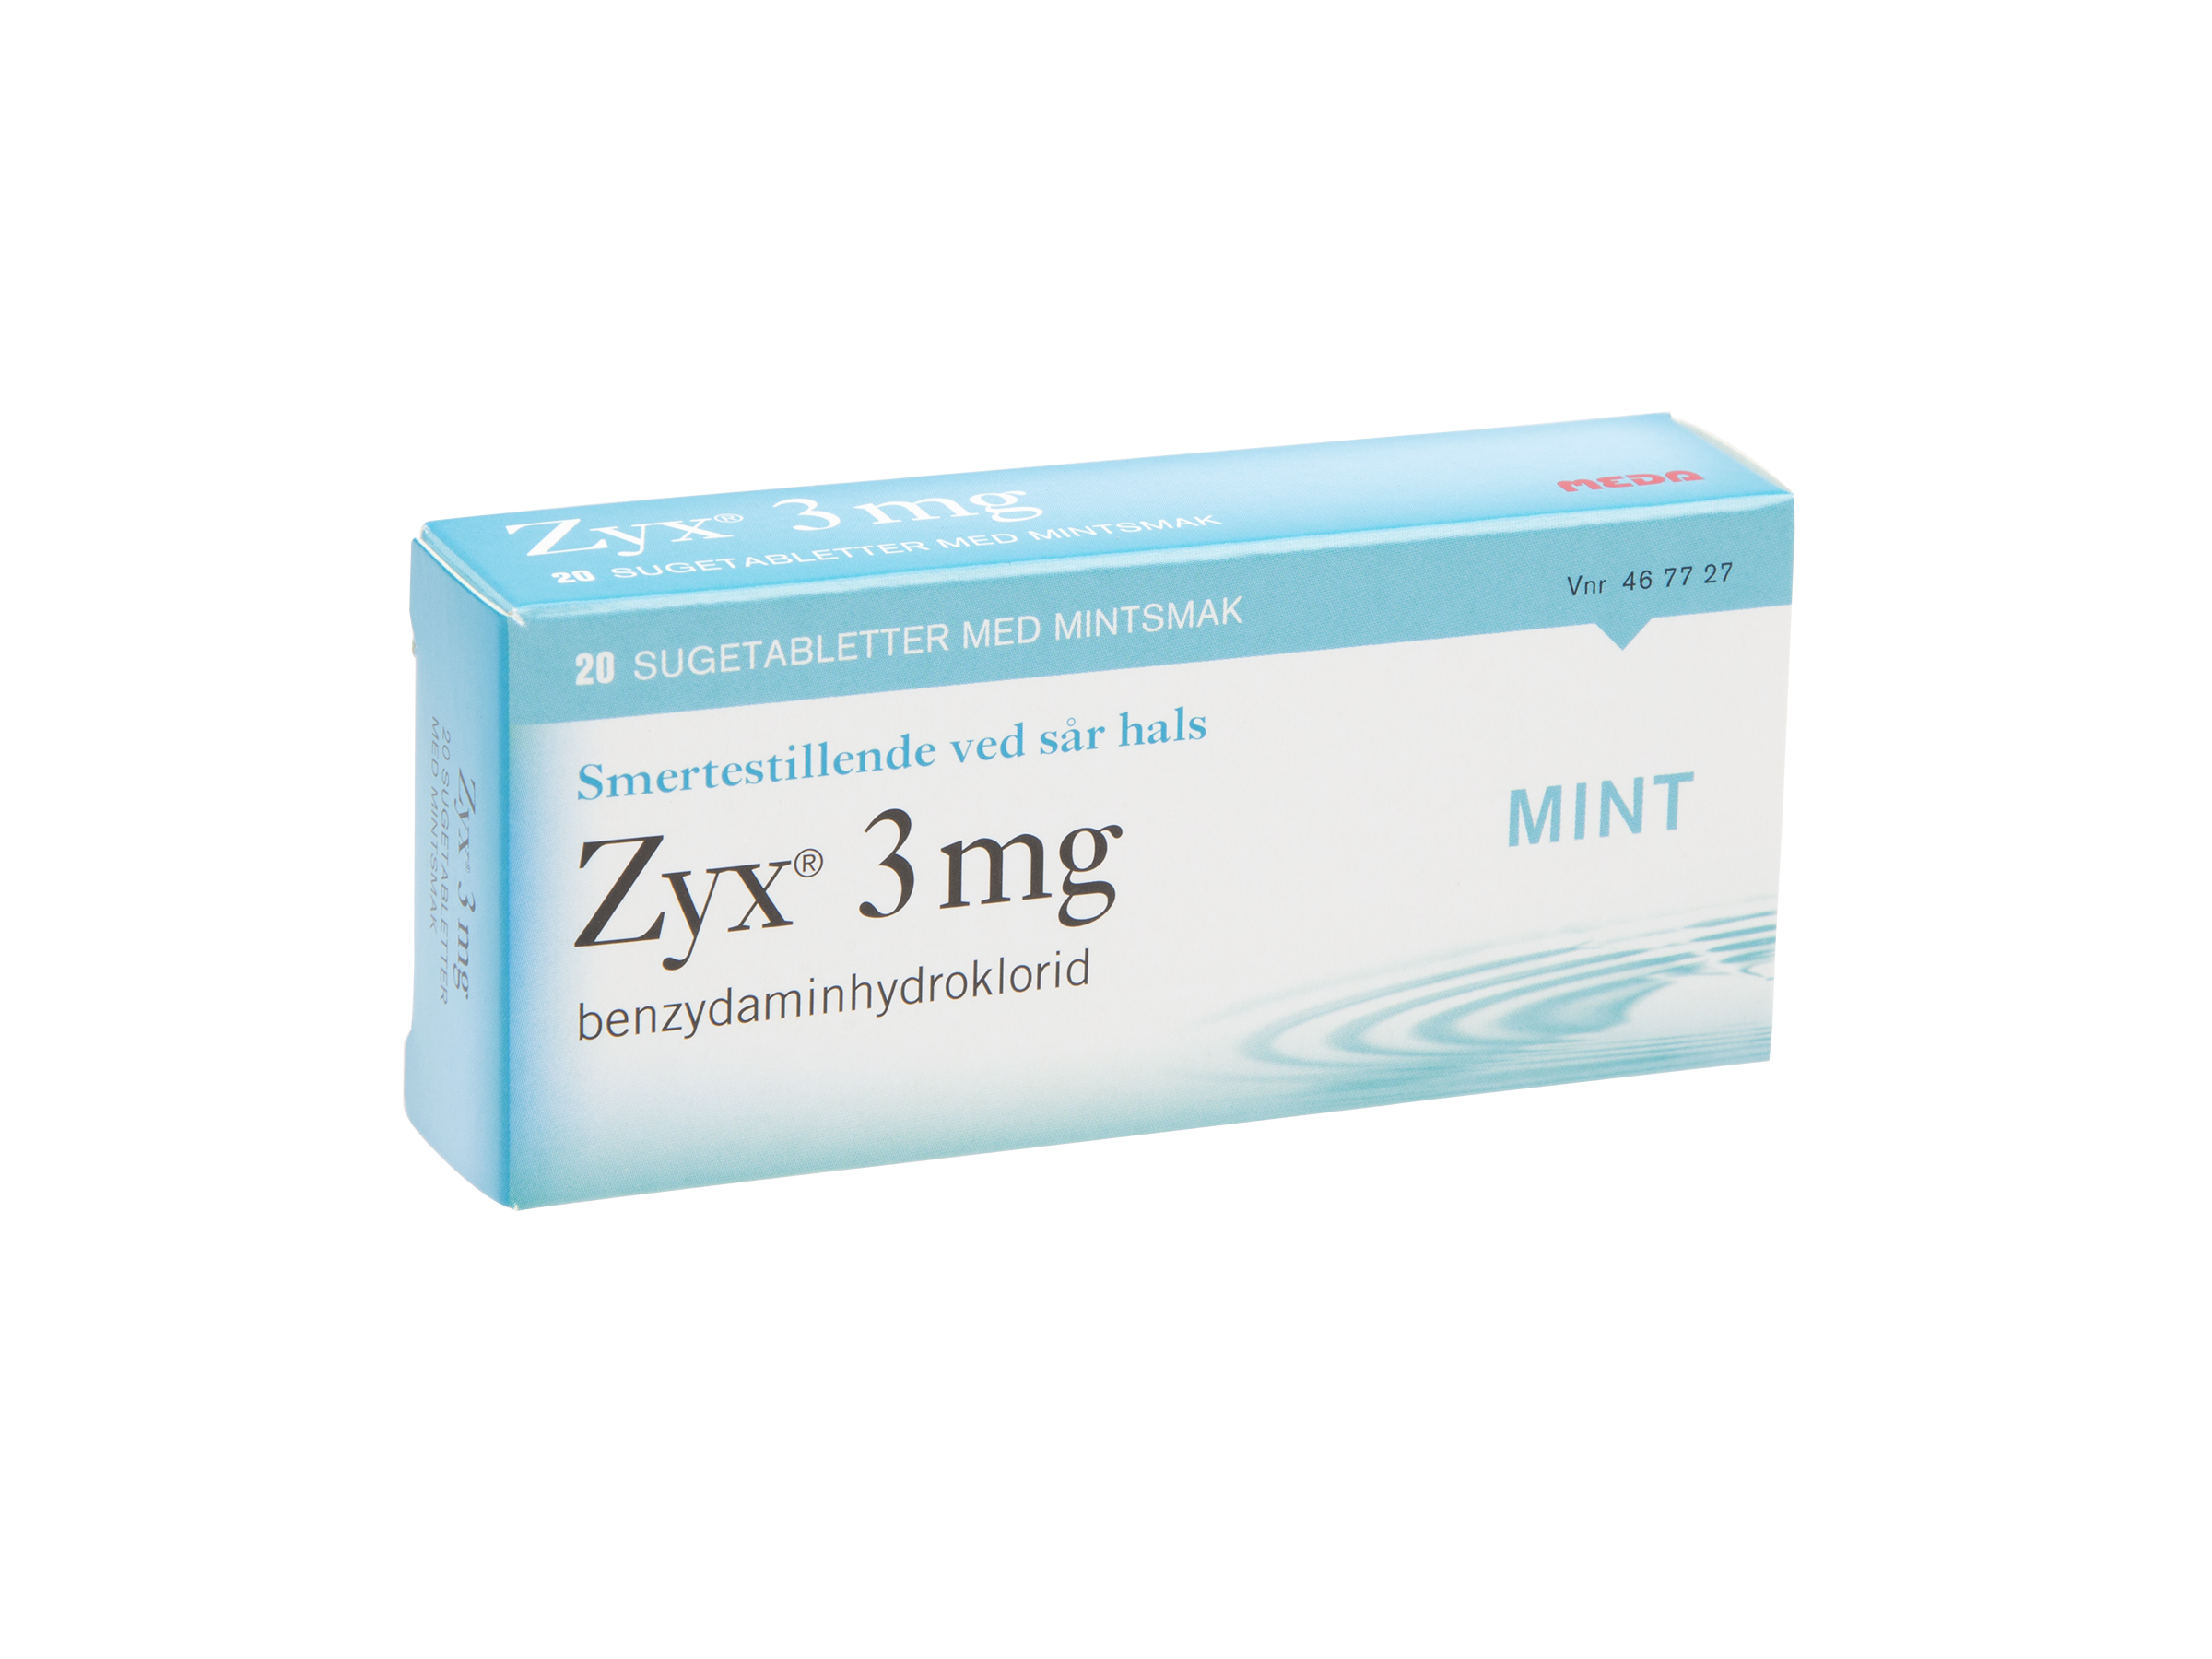 Zyx 3 mg mint sugetabletter, 20 stk.